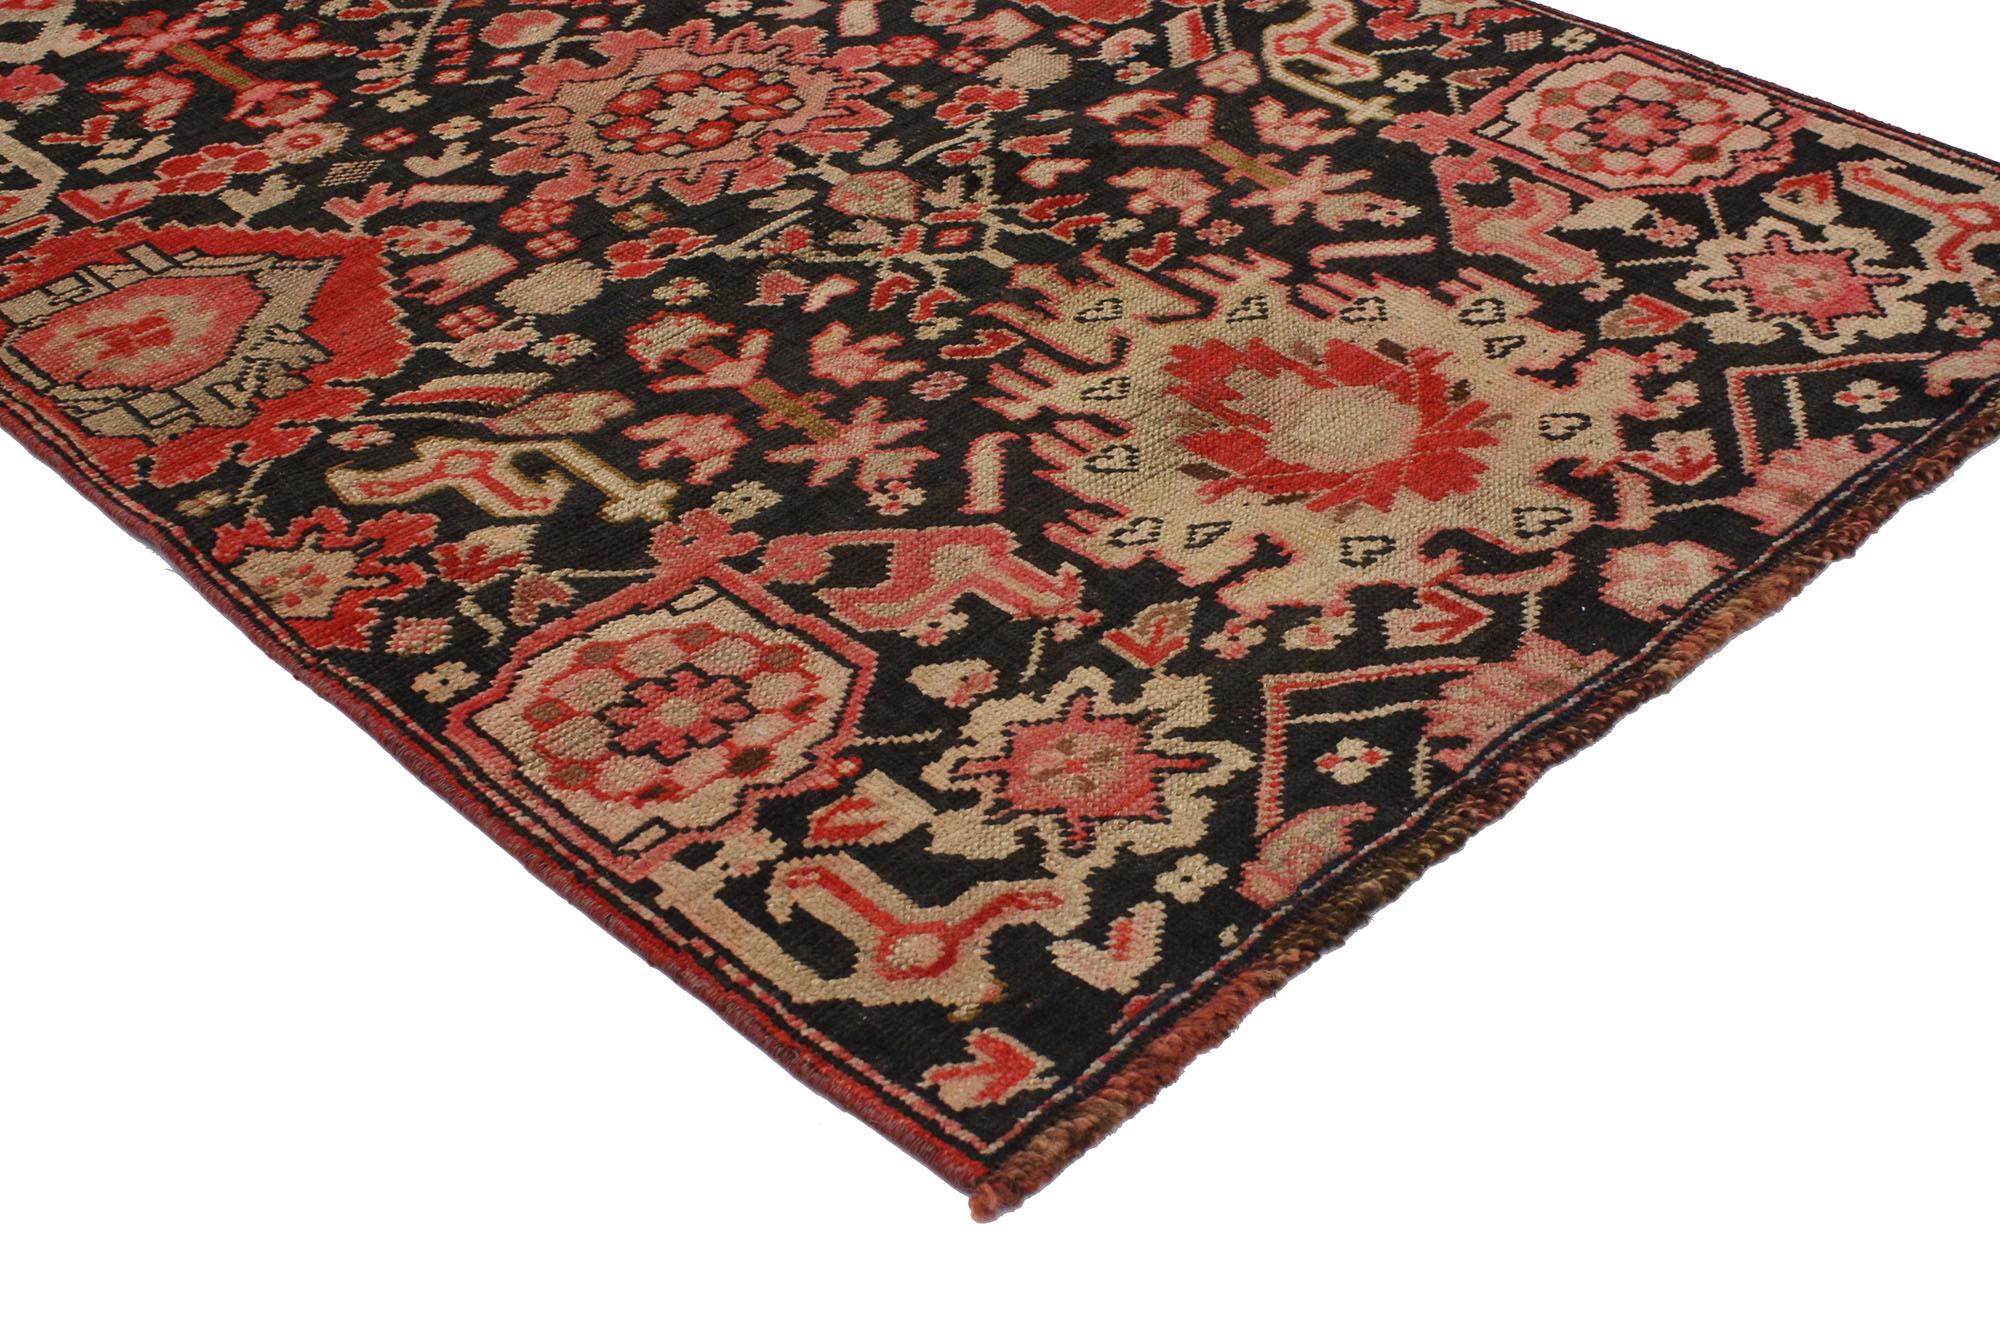 51769 Vintage Turkish Oushak Rug, 02'10 x 04'01.
Maximalist style meets traditional sensibility in this hand knotted wool vintage Turkish Oushak rug. The intrinsic botanical design and energetic earthy colorway woven into piece work together